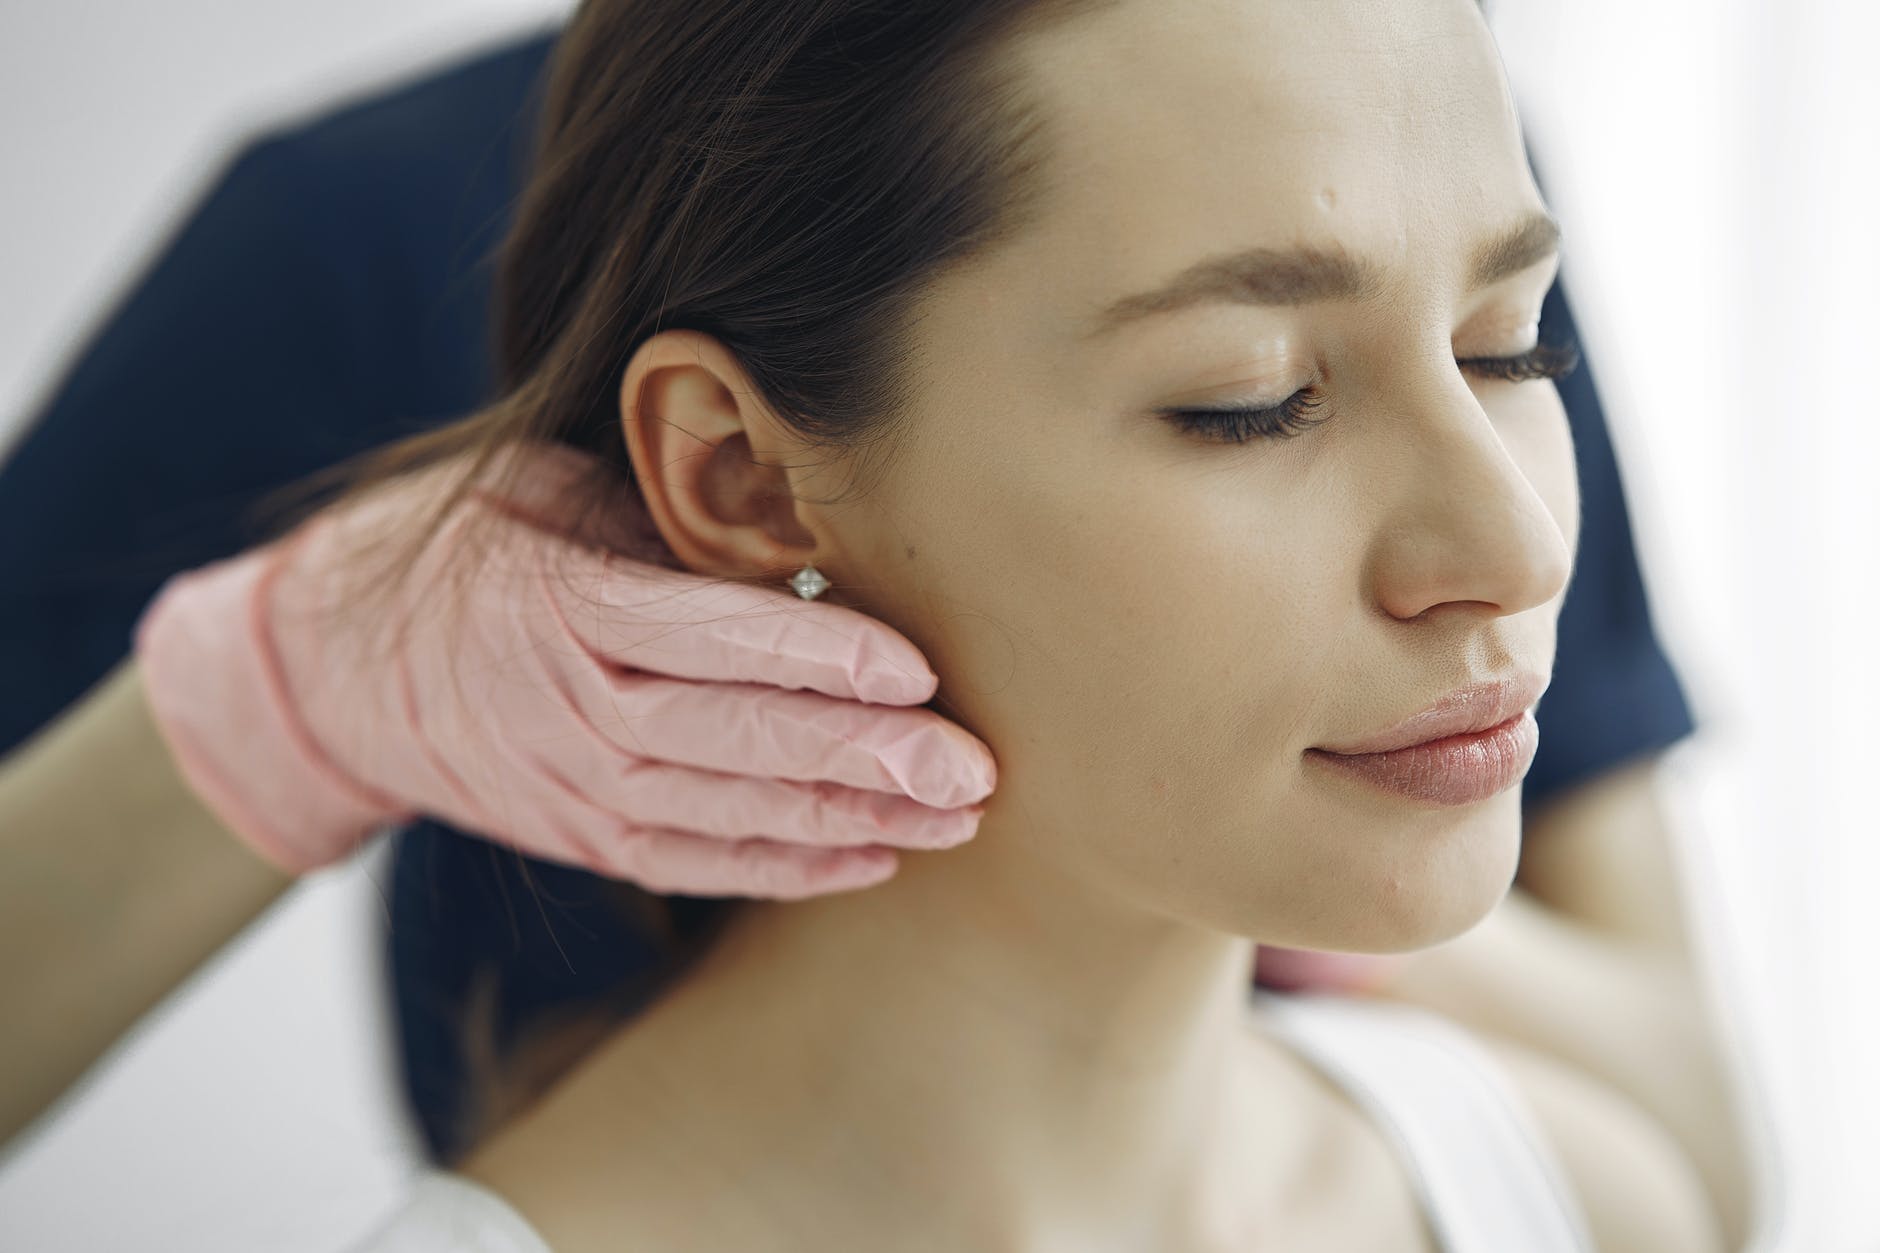 Skin Tightening: How Can You Enjoy Modern Non-Surgical Options?